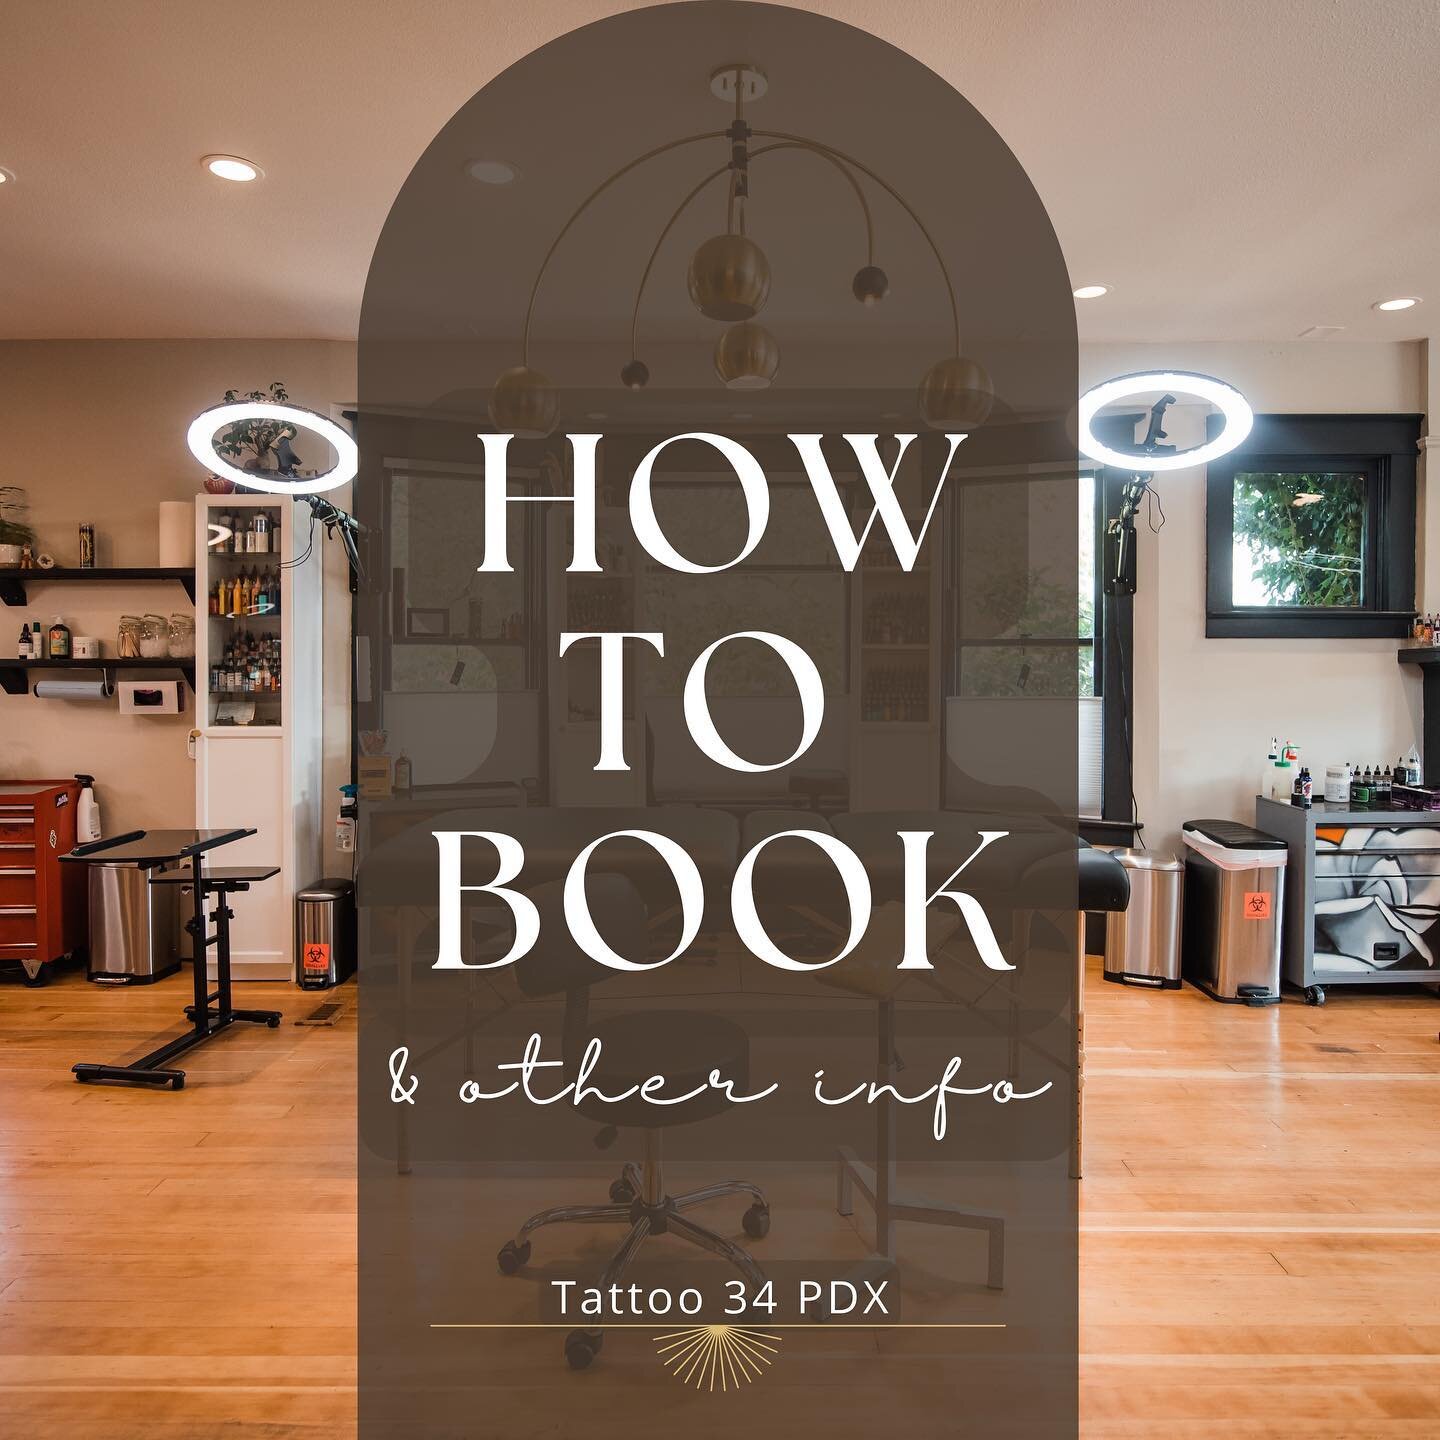 💻 How to Book &amp; Other Info: 

The shop is by appointment only (except for Walk in Wednesday &amp; Sunday). Also, when tattoo artist Ciel has openings, he will take same day appointments, link in bio!

All of the artists handle their own calendar